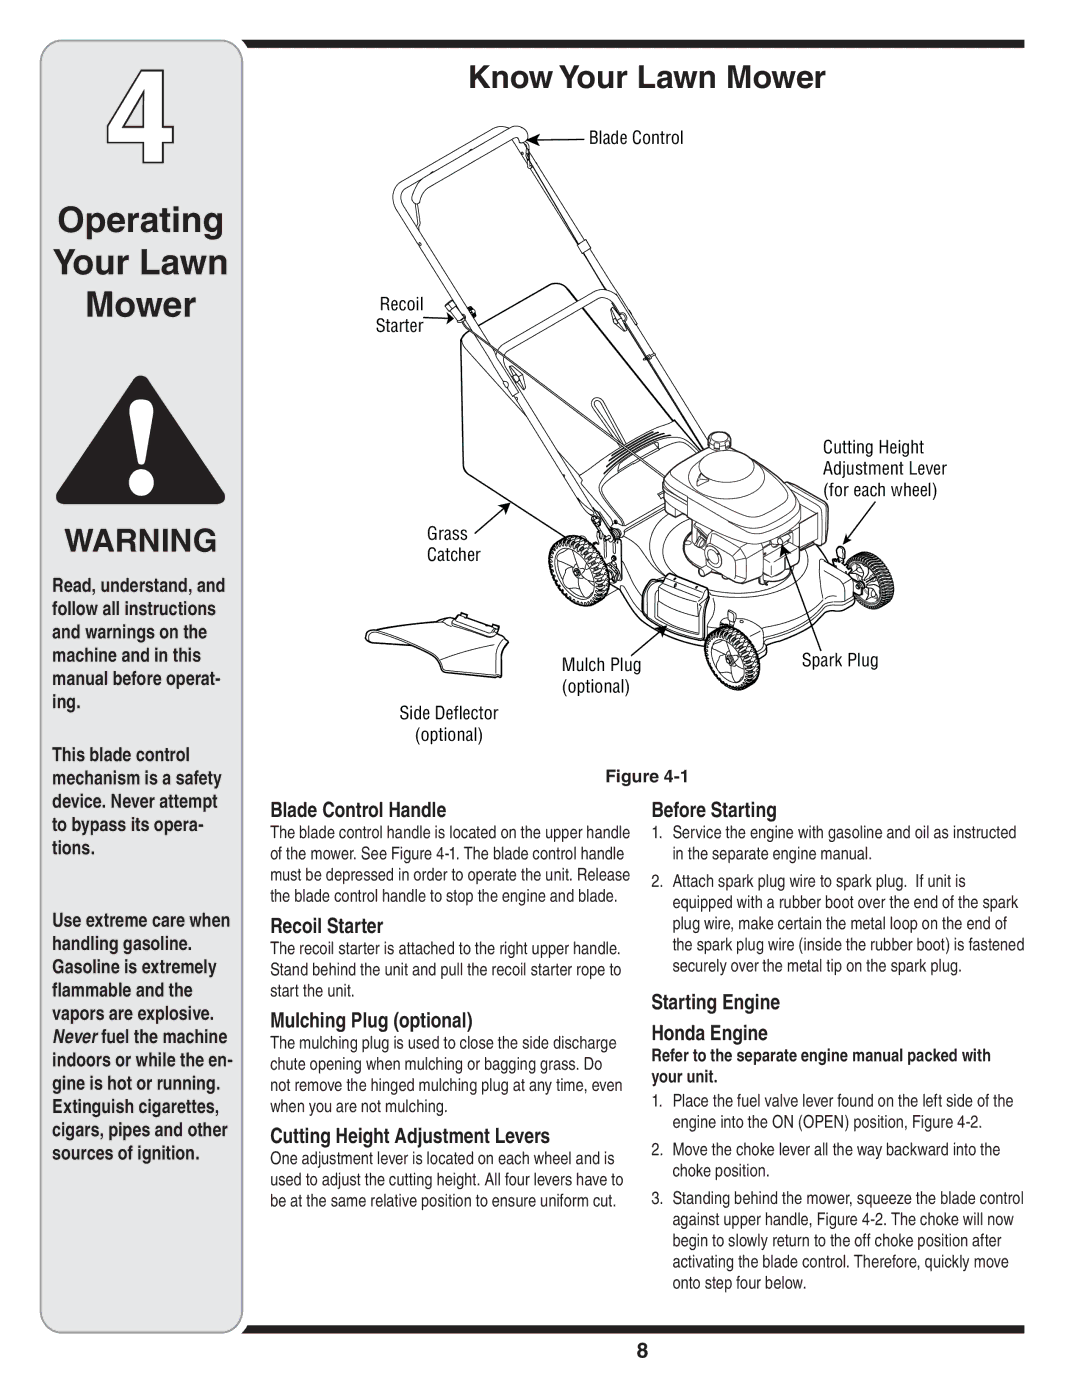 White Outdoor 400 warranty Operating Your Lawn Mower, Know Your Lawn Mower 